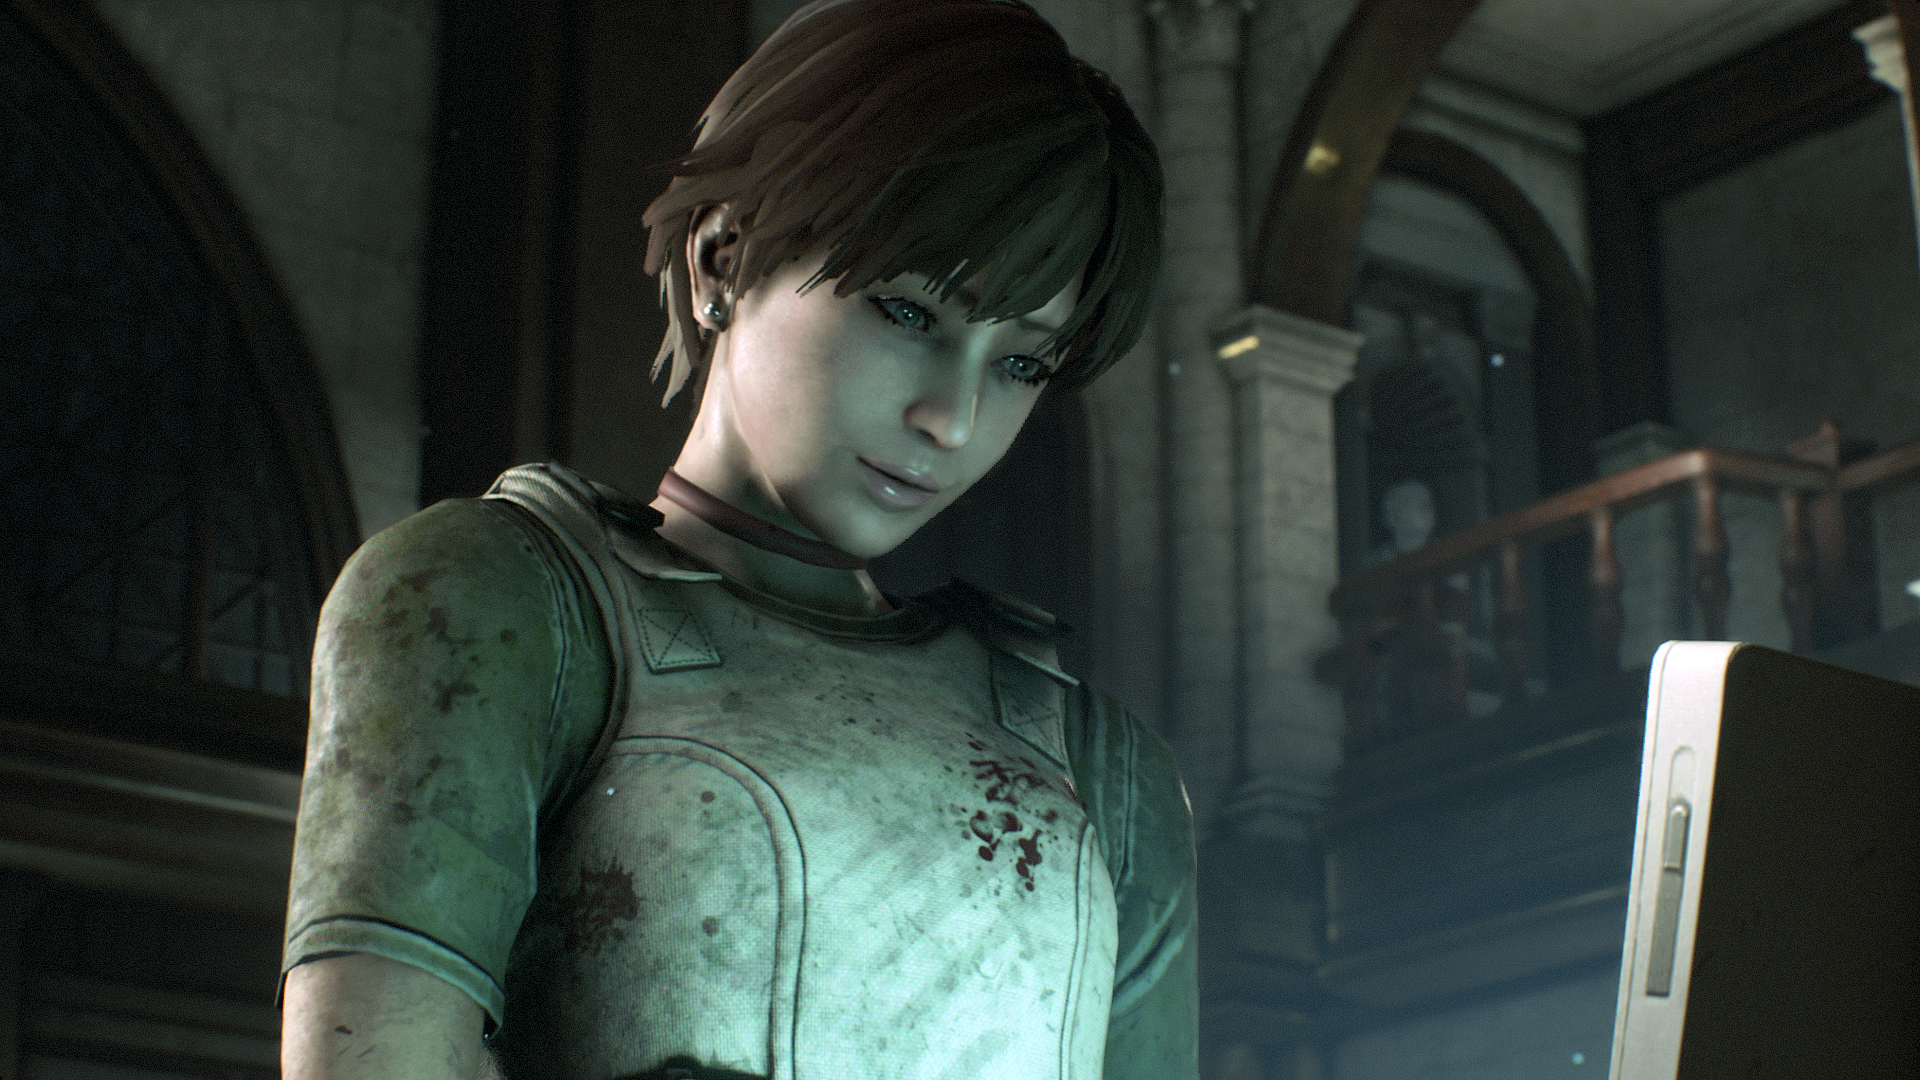 Rebecca Chambers (Dead By Daylight) at Resident Evil 2 (2019) Nexus and community